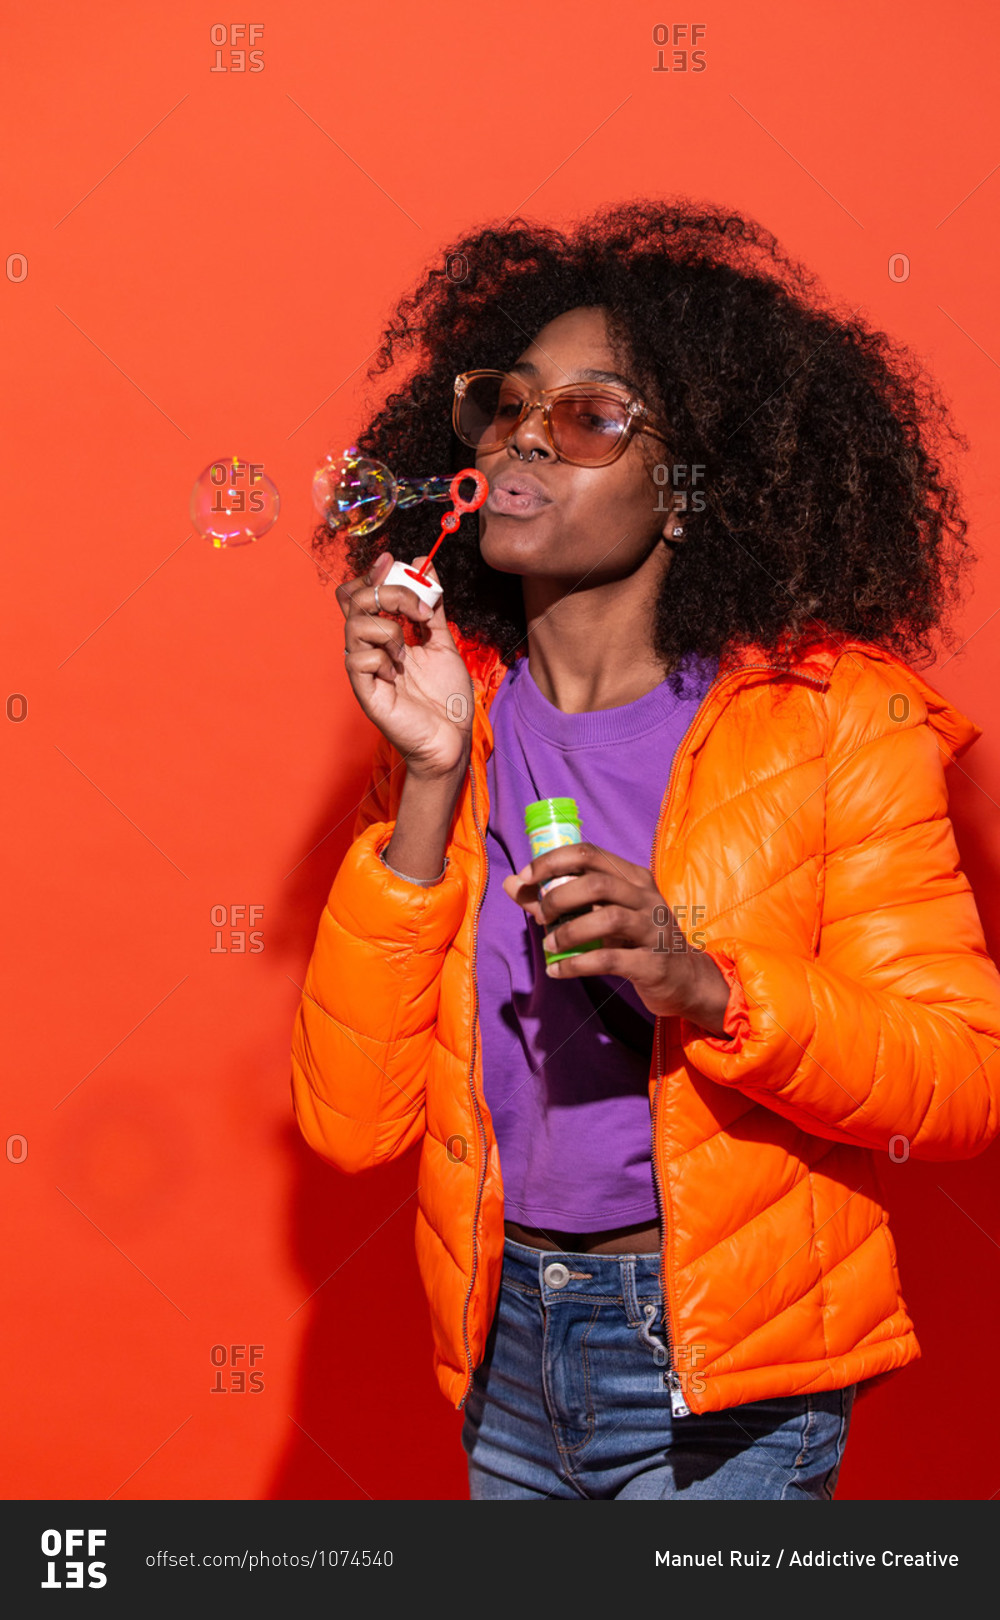 Modern African American female in colorful jacket blowing soap bubbles having fun in studio on red background